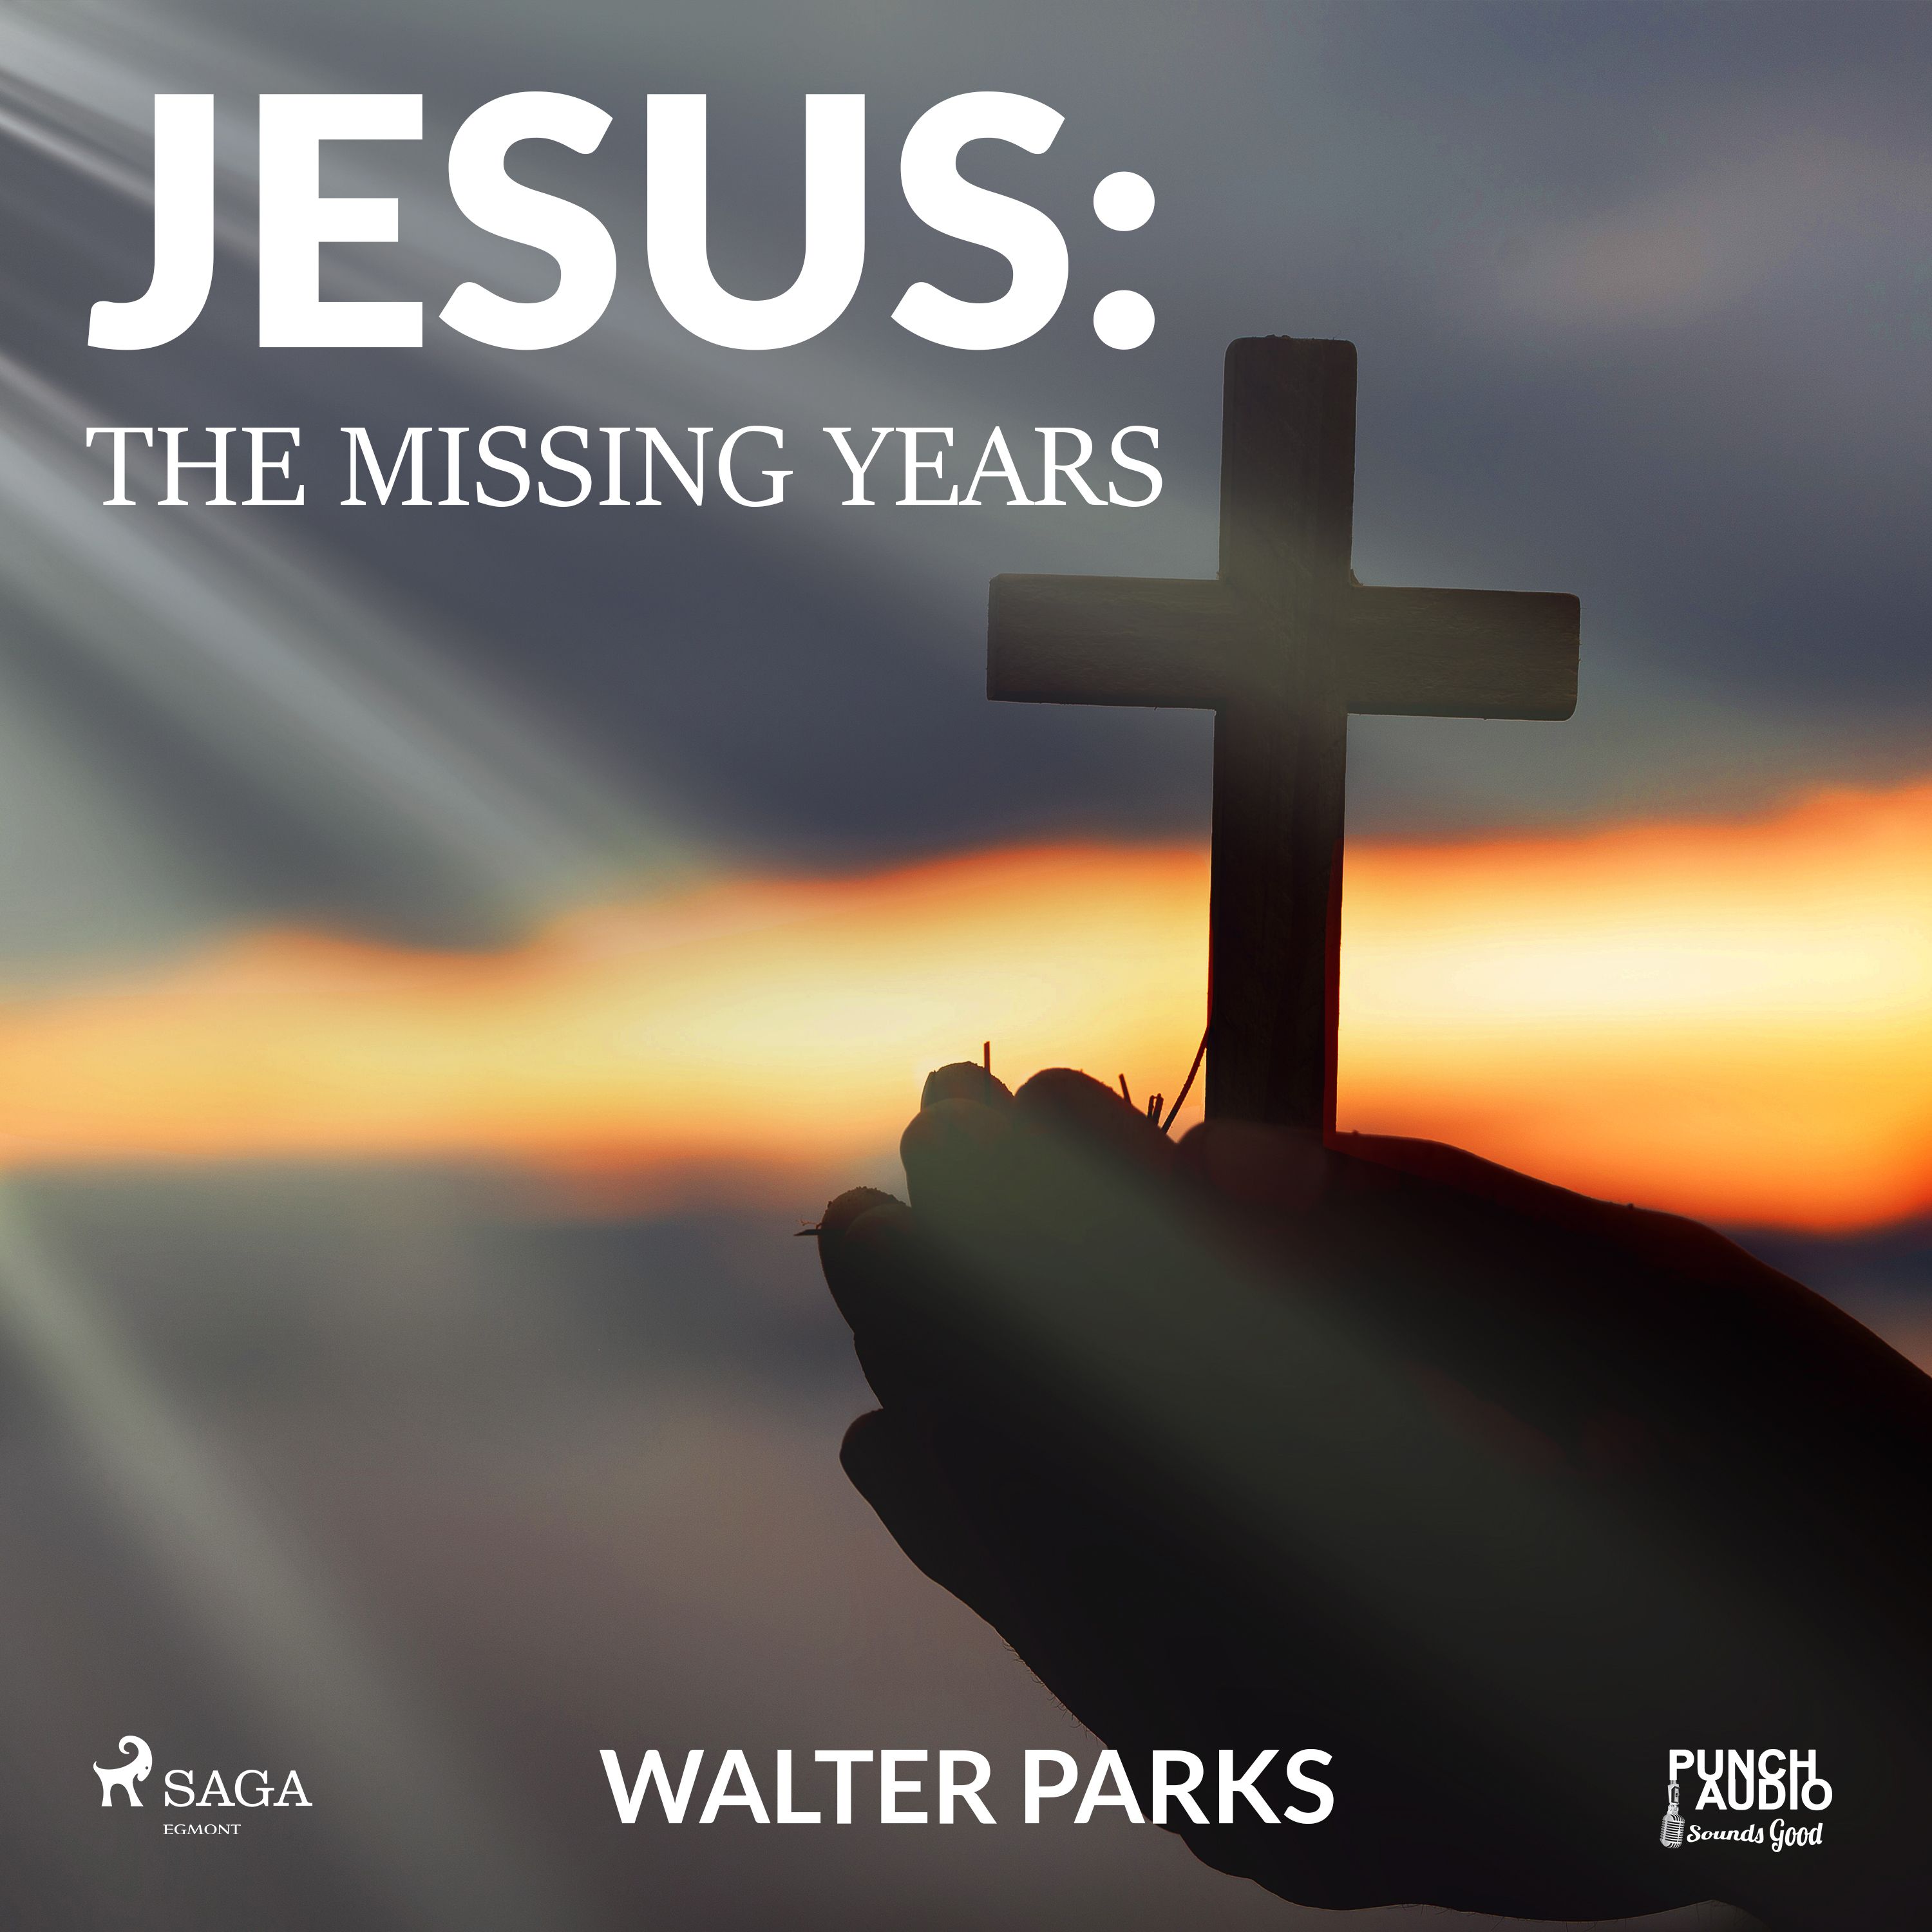 Jesus: The Missing Years, audiobook by Walter Parks